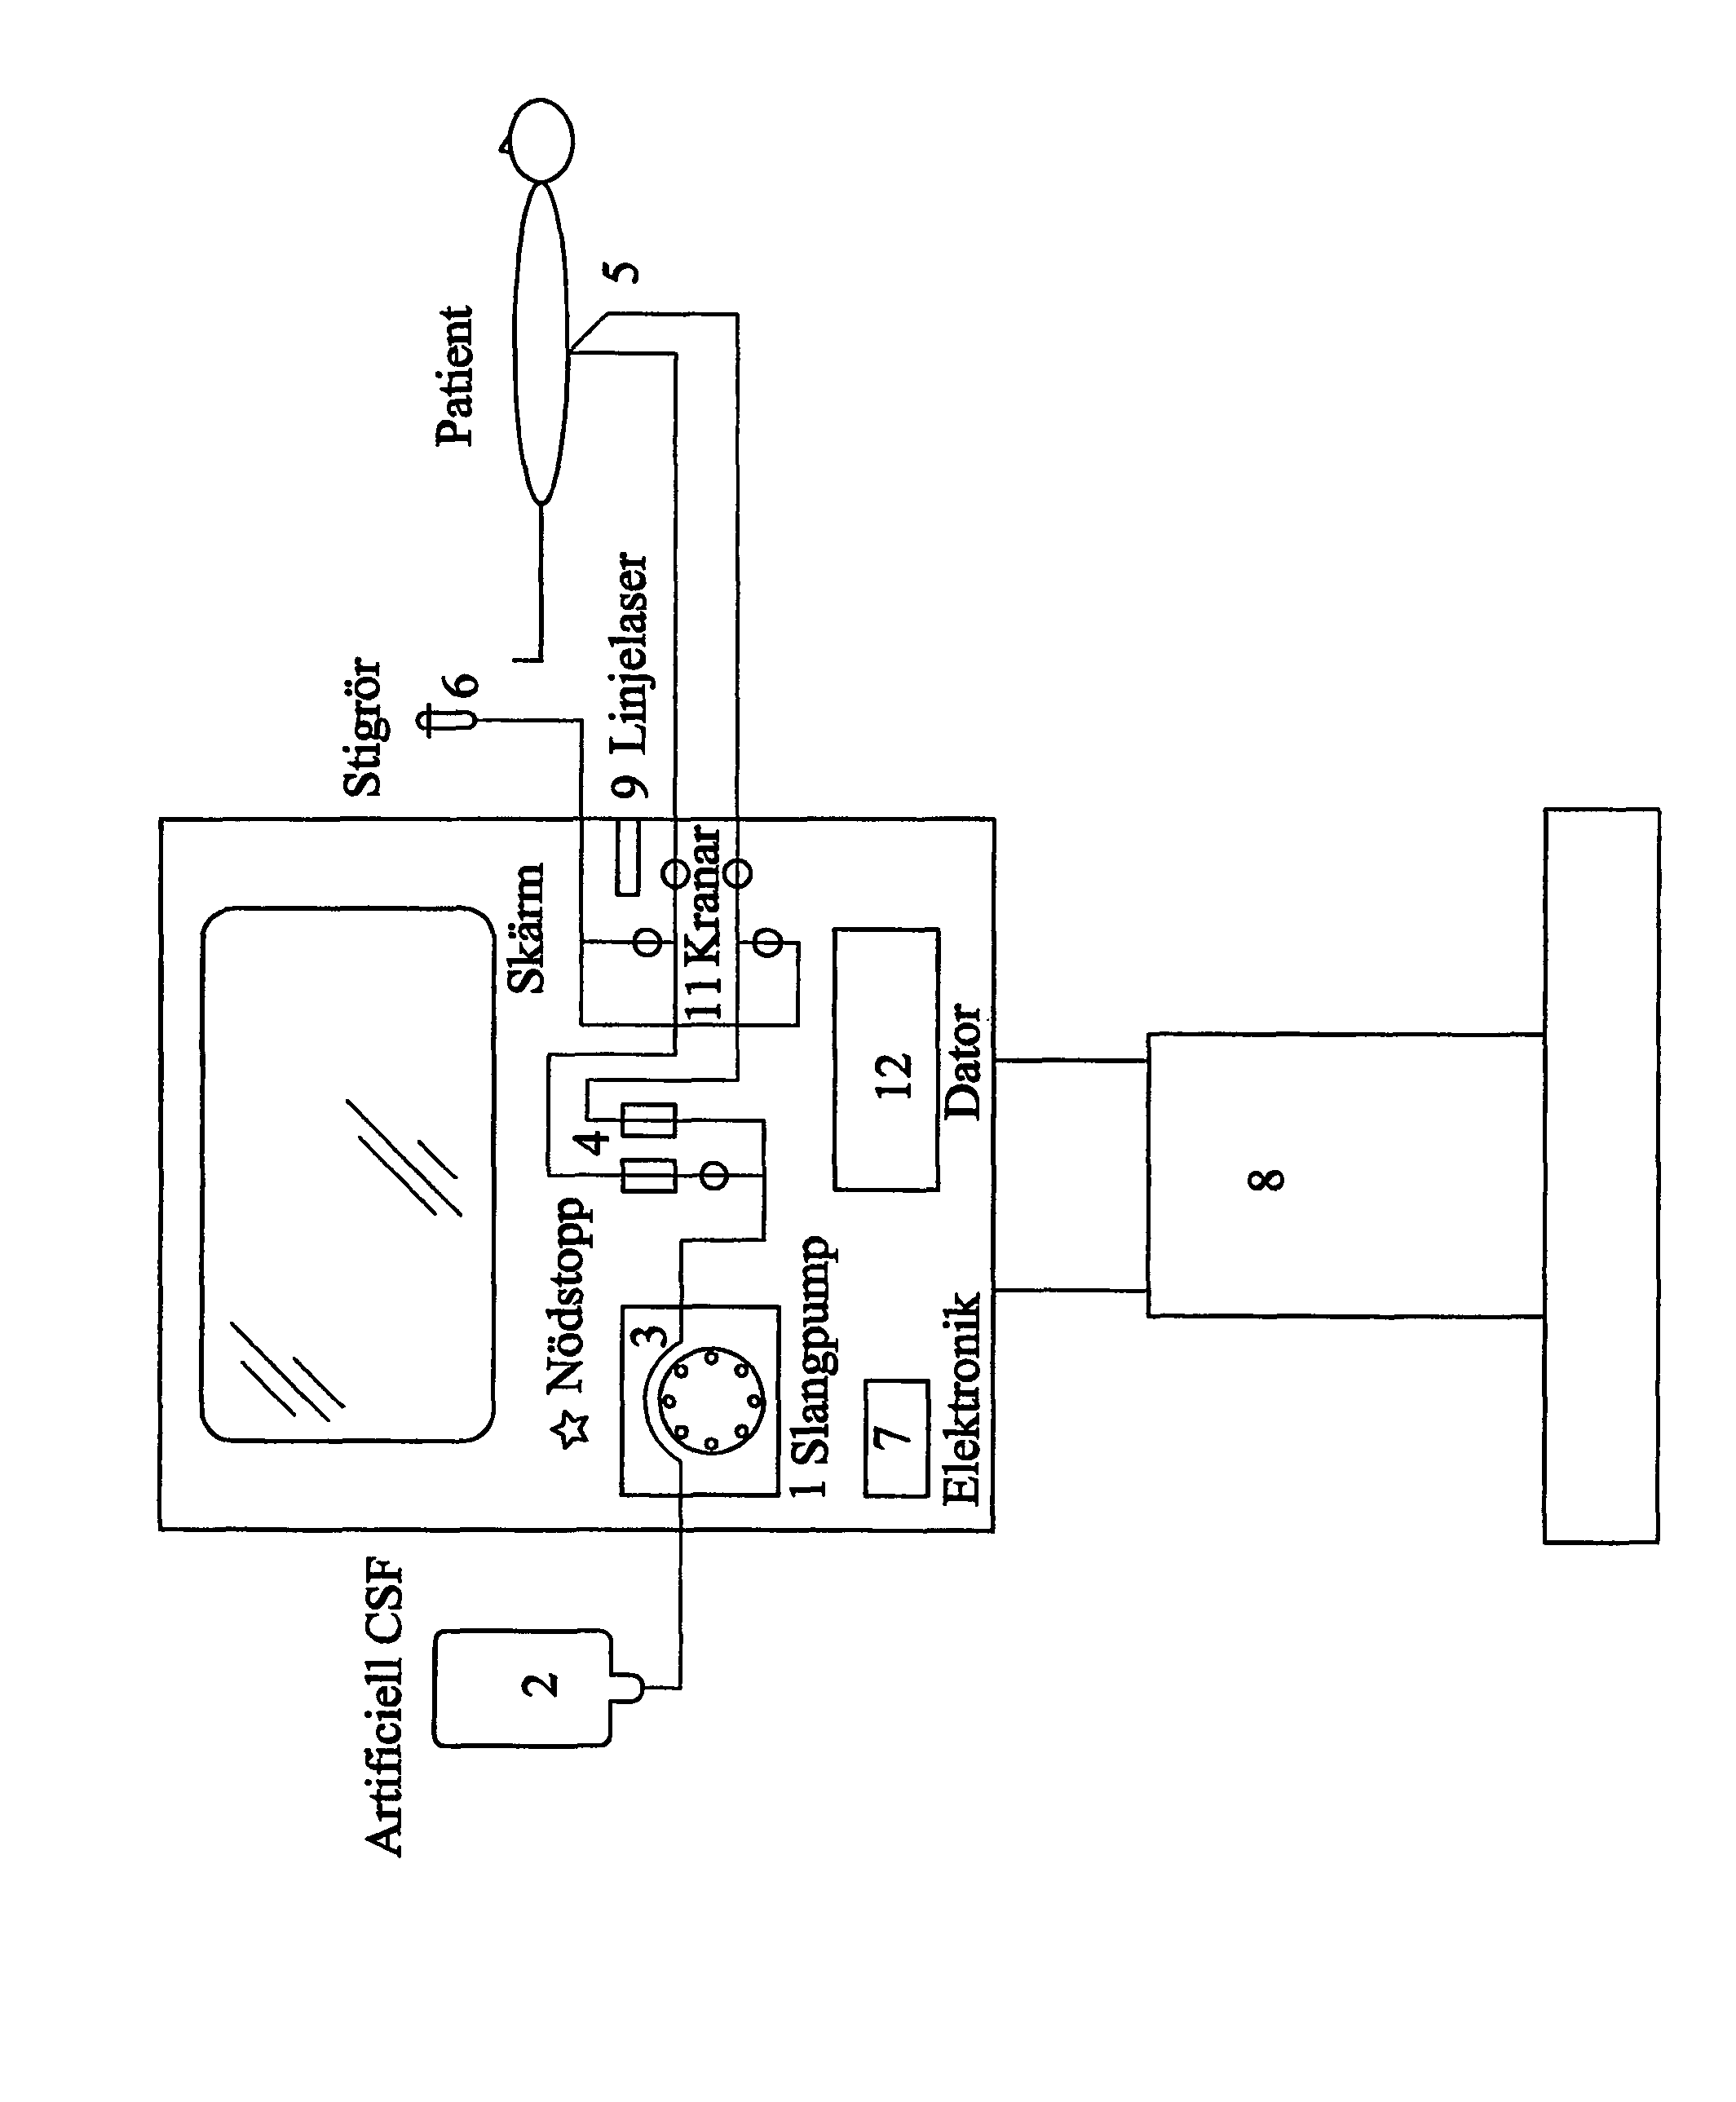 Method and device for determining the hydrodynamics of the cerebrospinal fluid system